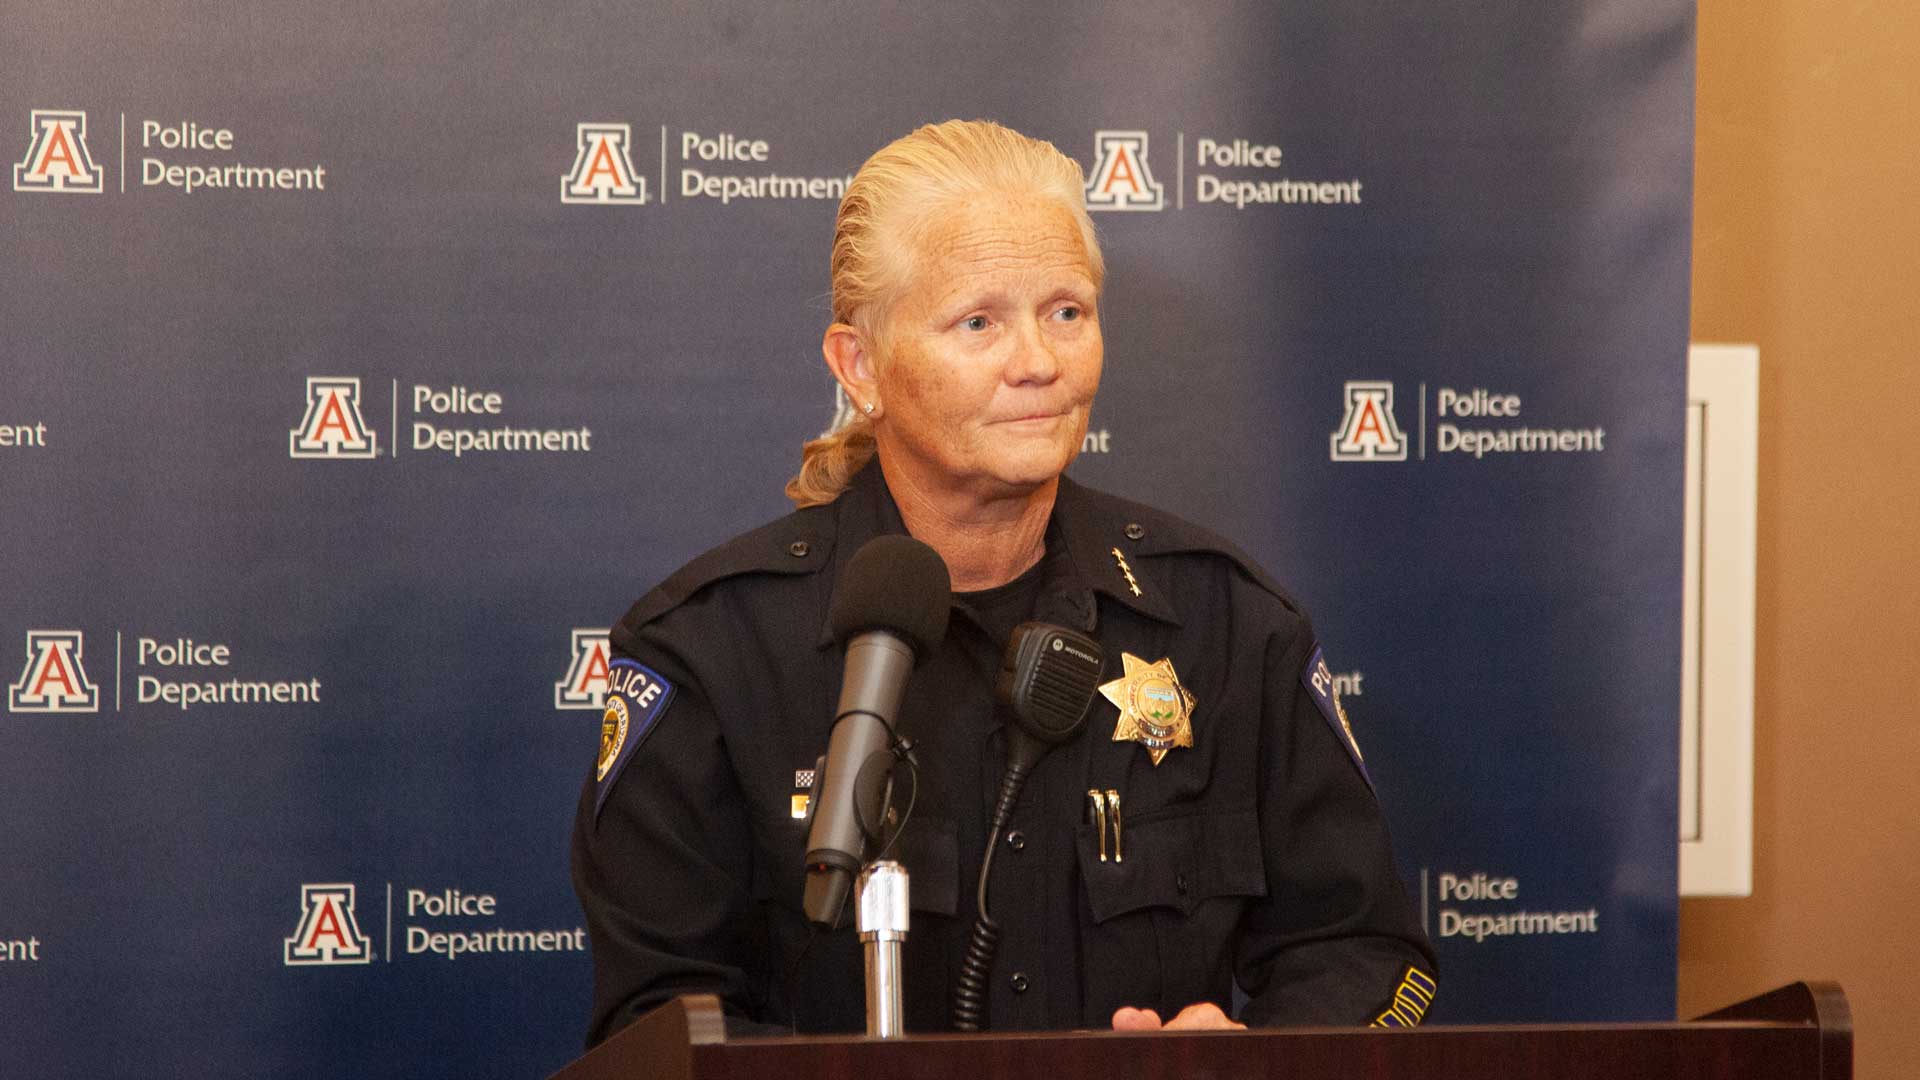 University of Arizona Police Chief Paula Balafas speaks at a news conference after a deadly campus shooting on October 5, 2022